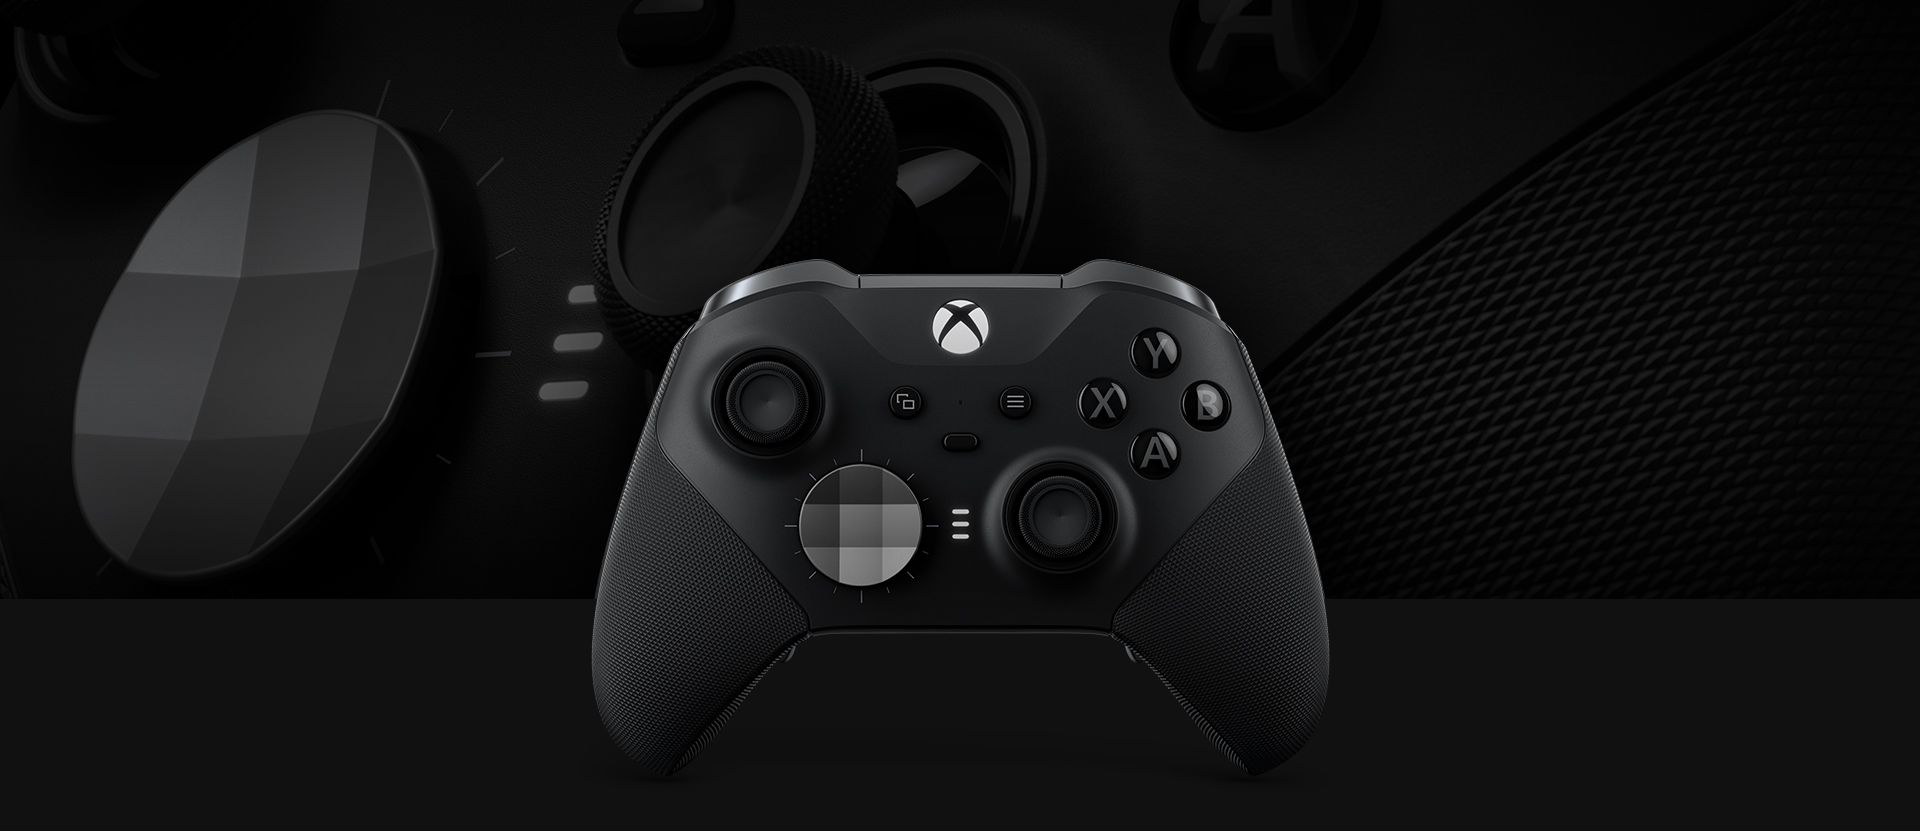 how to install xbox one controller driver windows 10